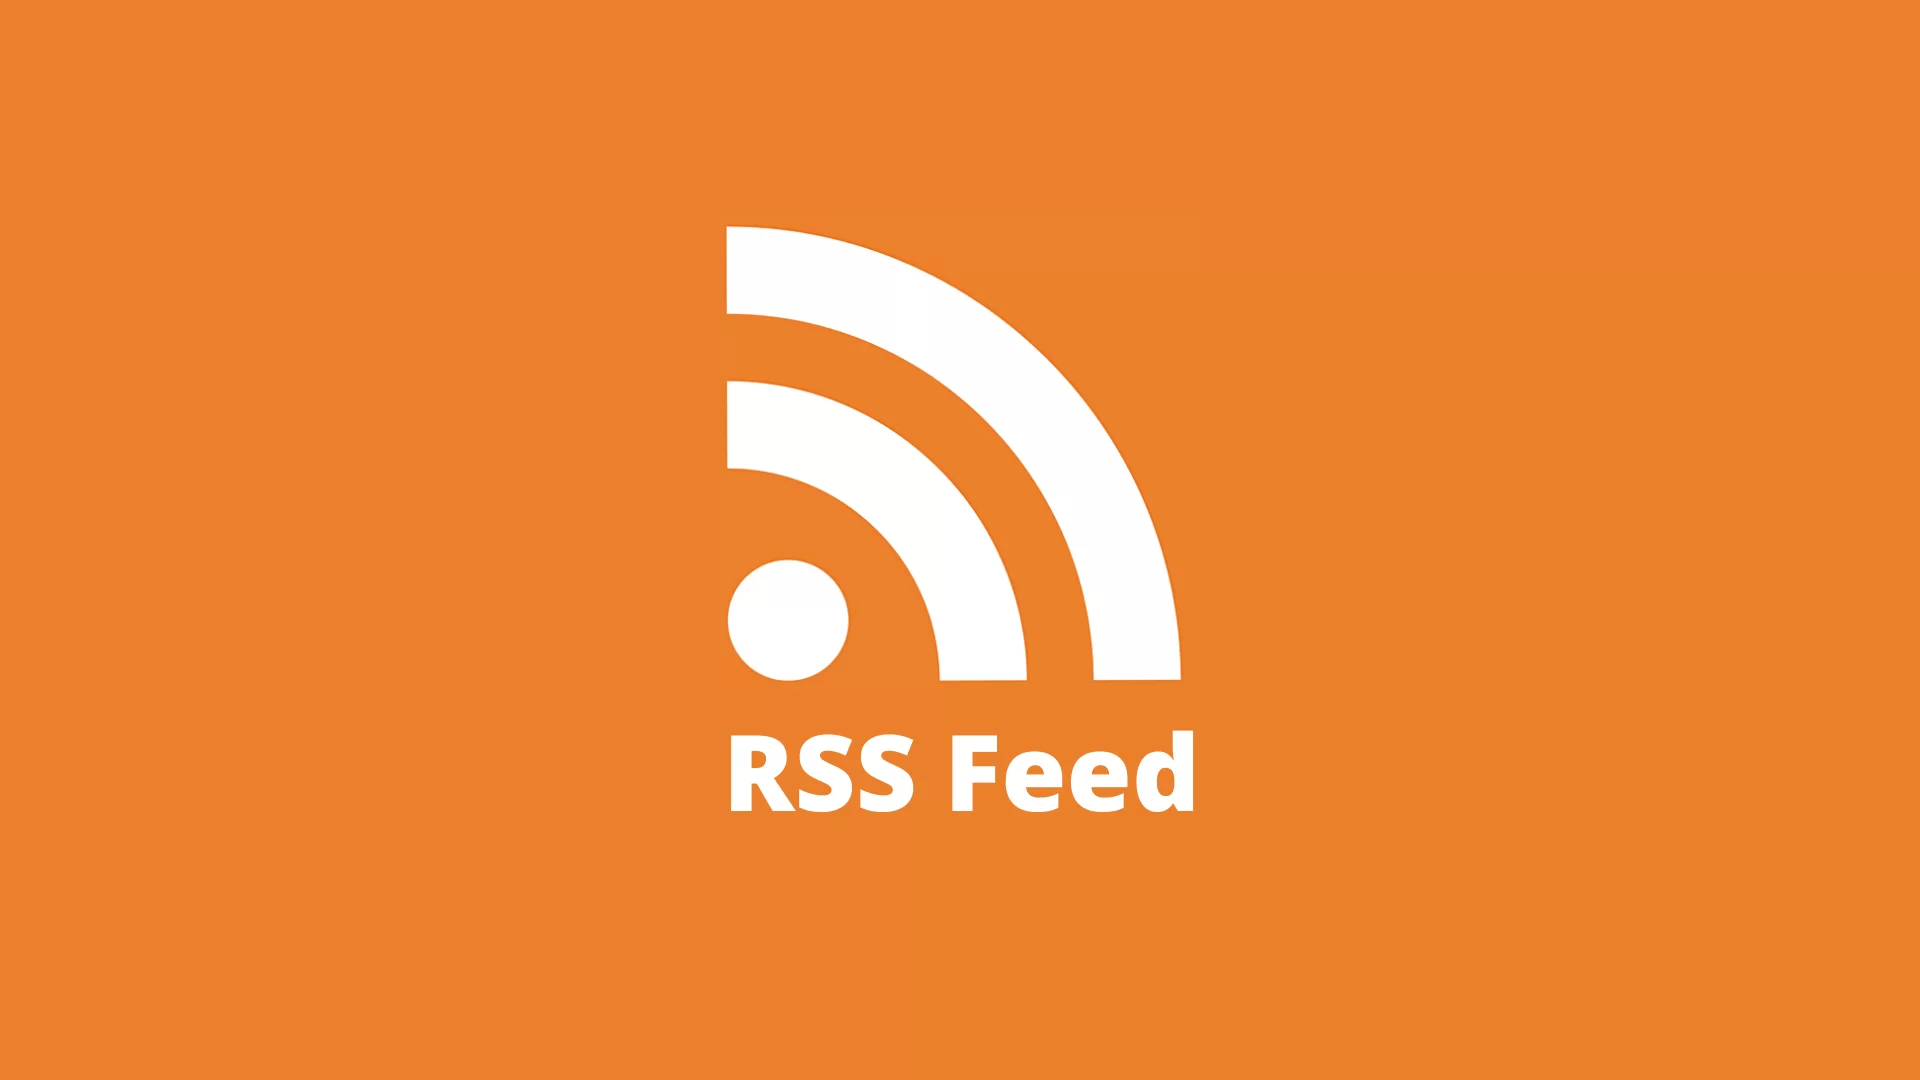 What is an RSS Feed?